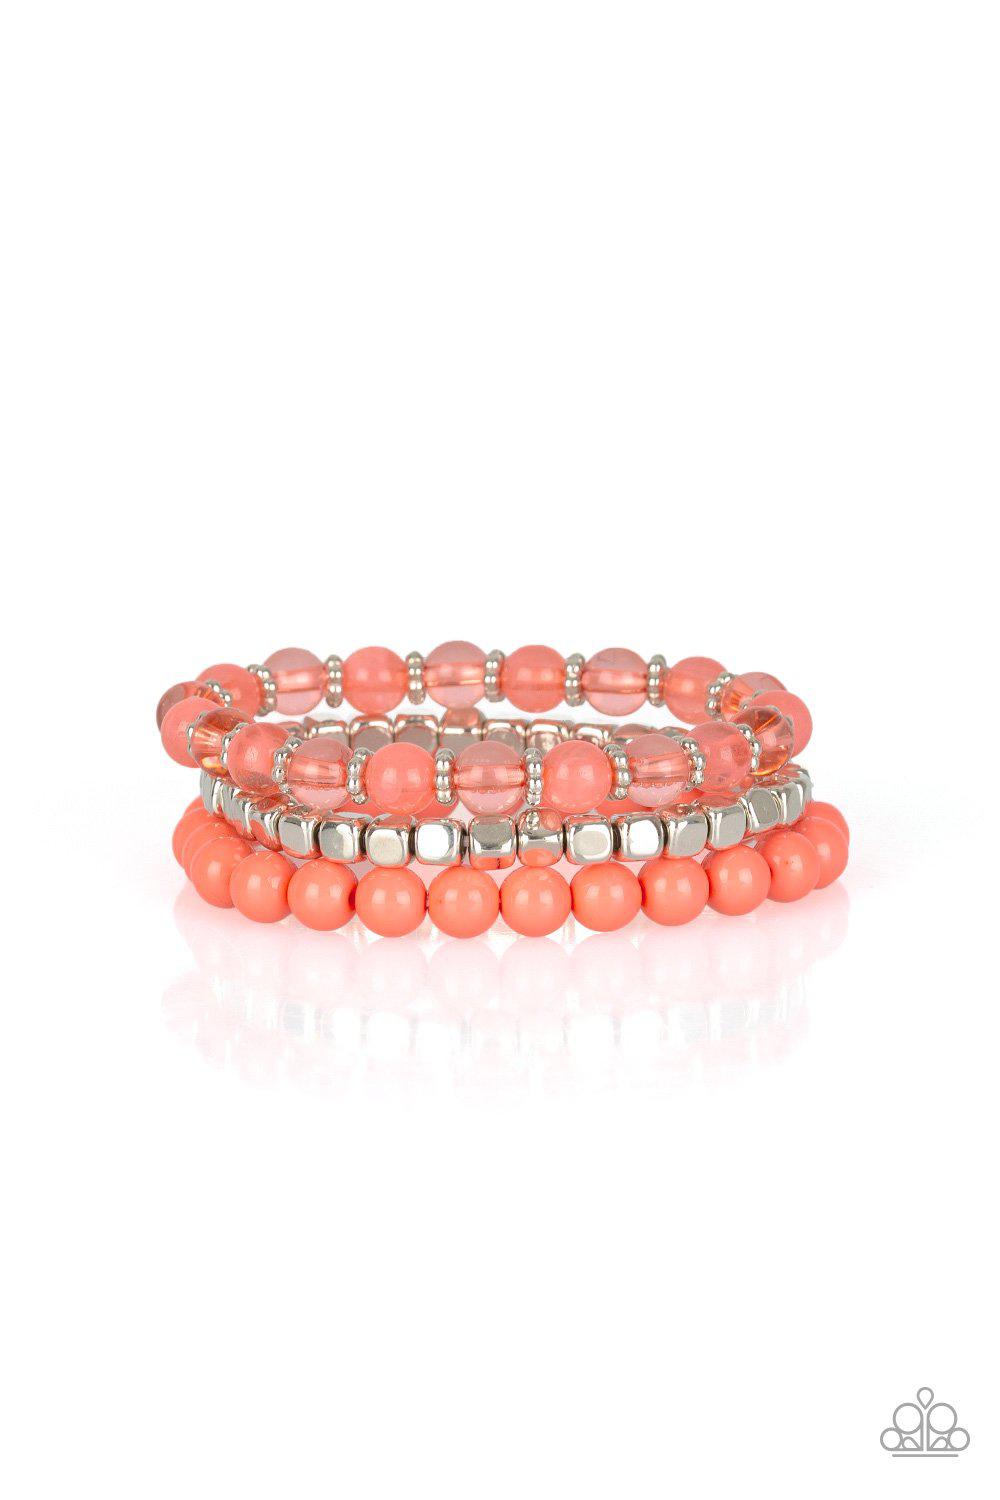 Globetrotter Glam Silver and Coral Bracelet Set - Paparazzi Accessories-CarasShop.com - $5 Jewelry by Cara Jewels